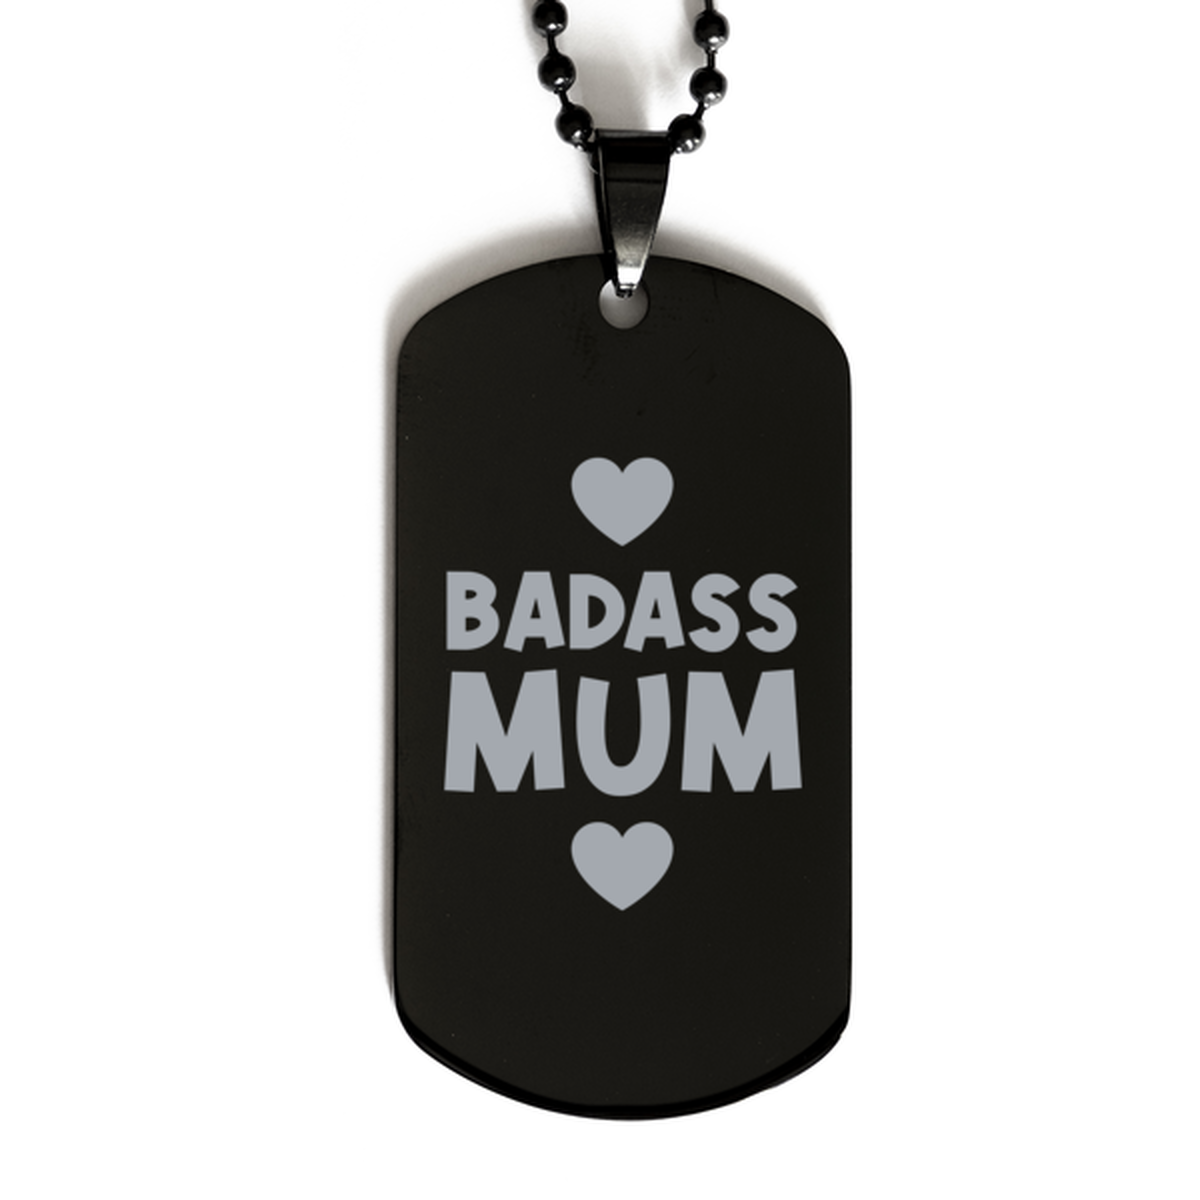 Mum Black Dog Tag, Badass Mum, Funny Family Gifts  Necklace For Mum From Son Daughter